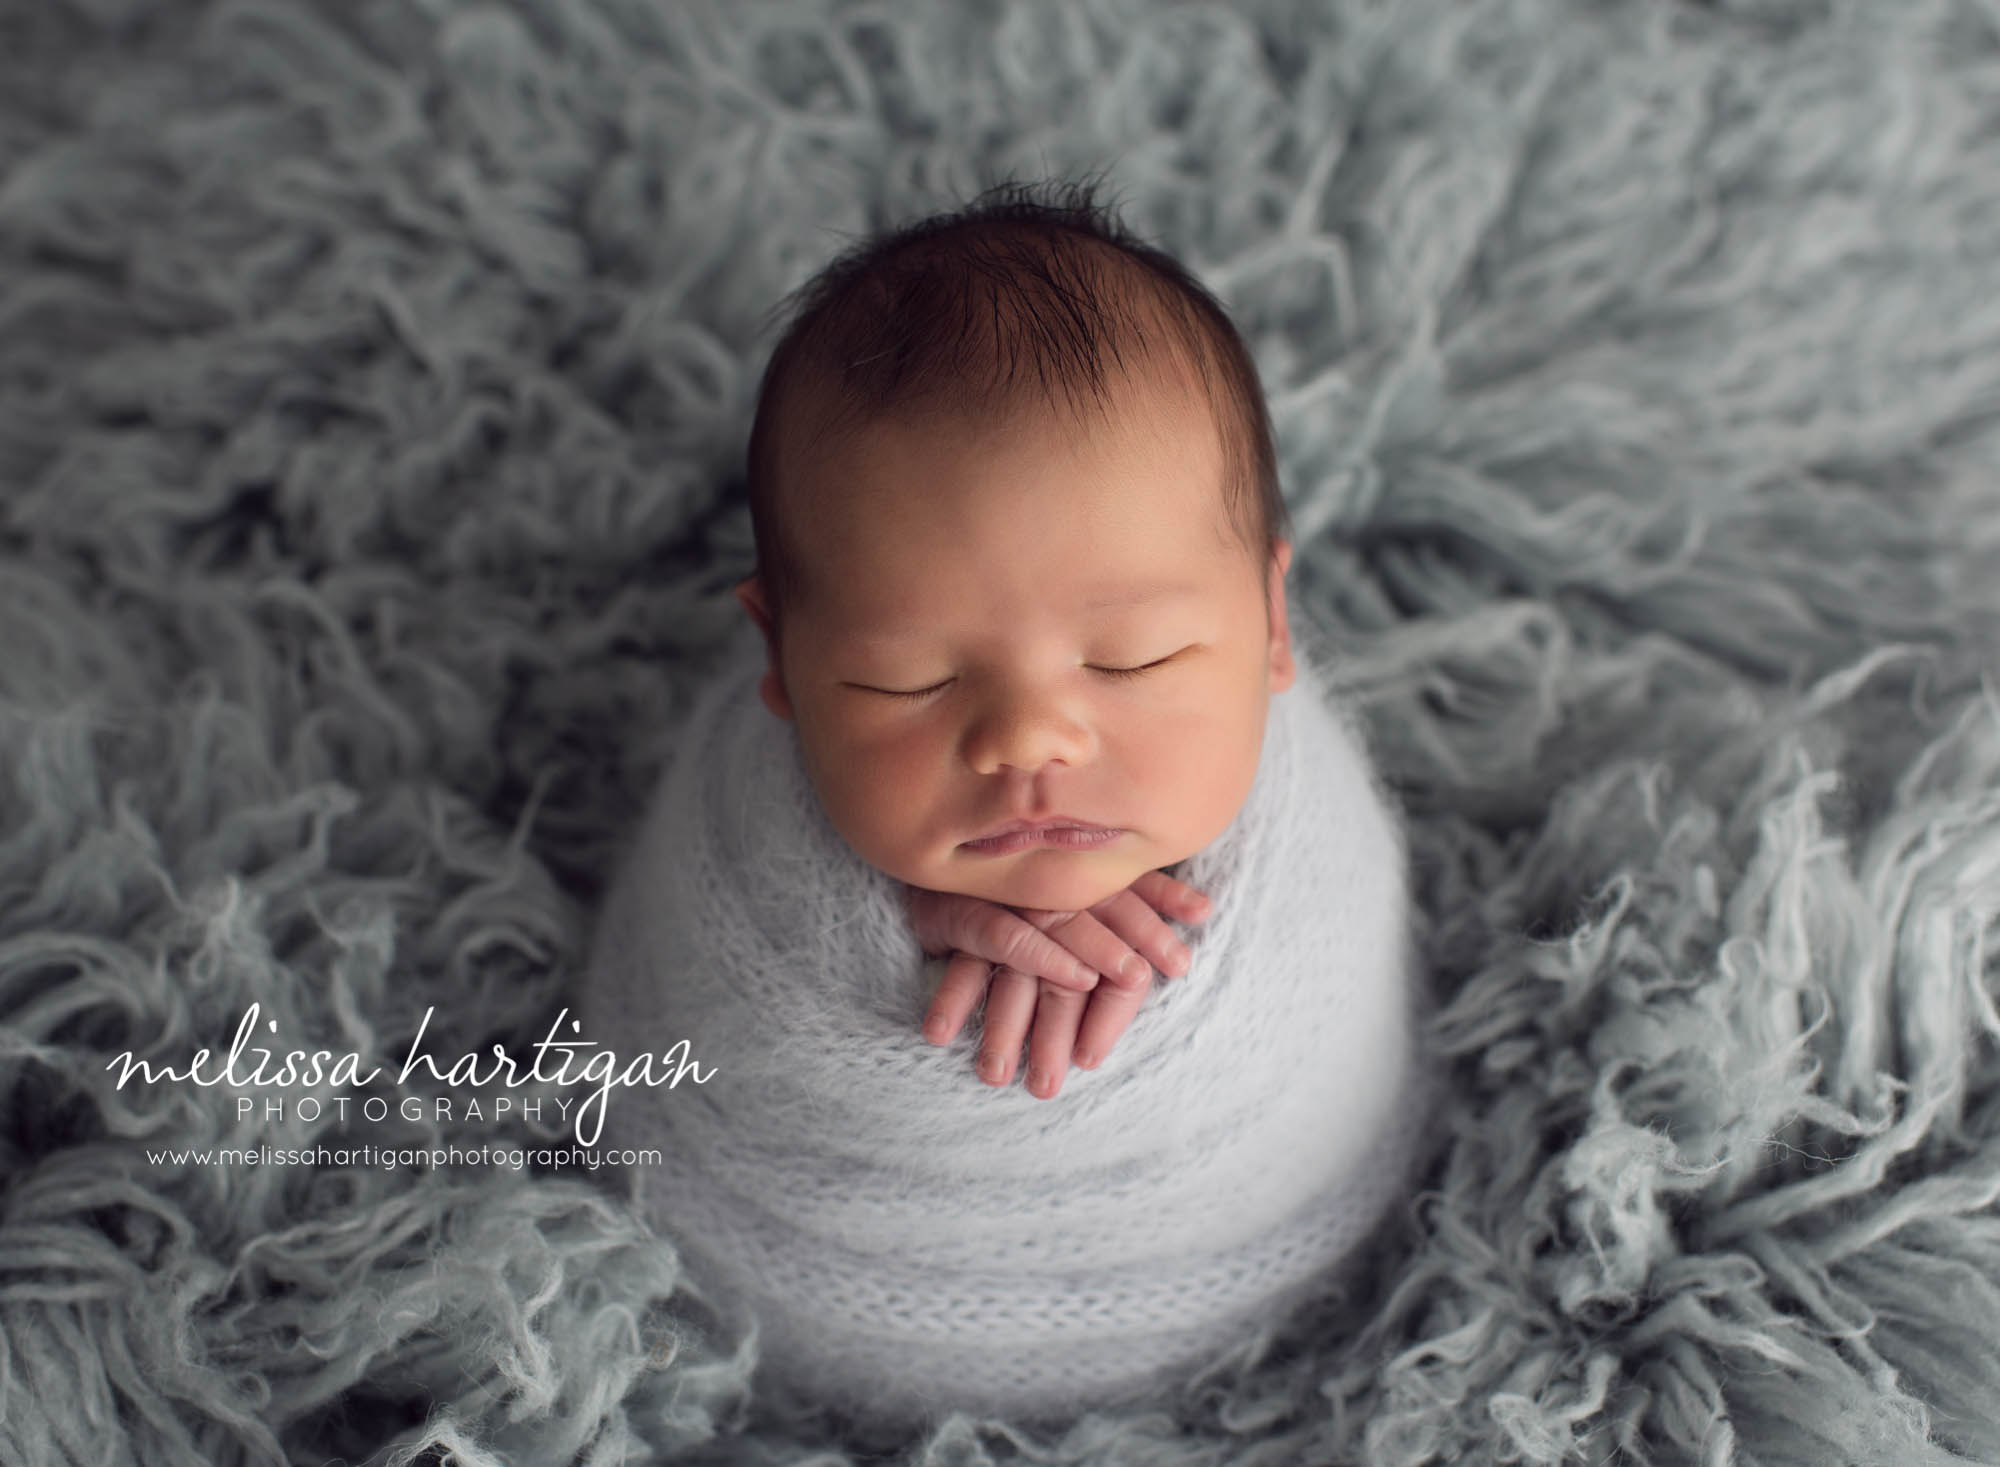 Melissa Hartigan Photography Maternity and Newborn Connecticut Photographer Lucas Newborn Session Baby boy sleeping on light blue knit wrap with hands sticking out on blue flokati